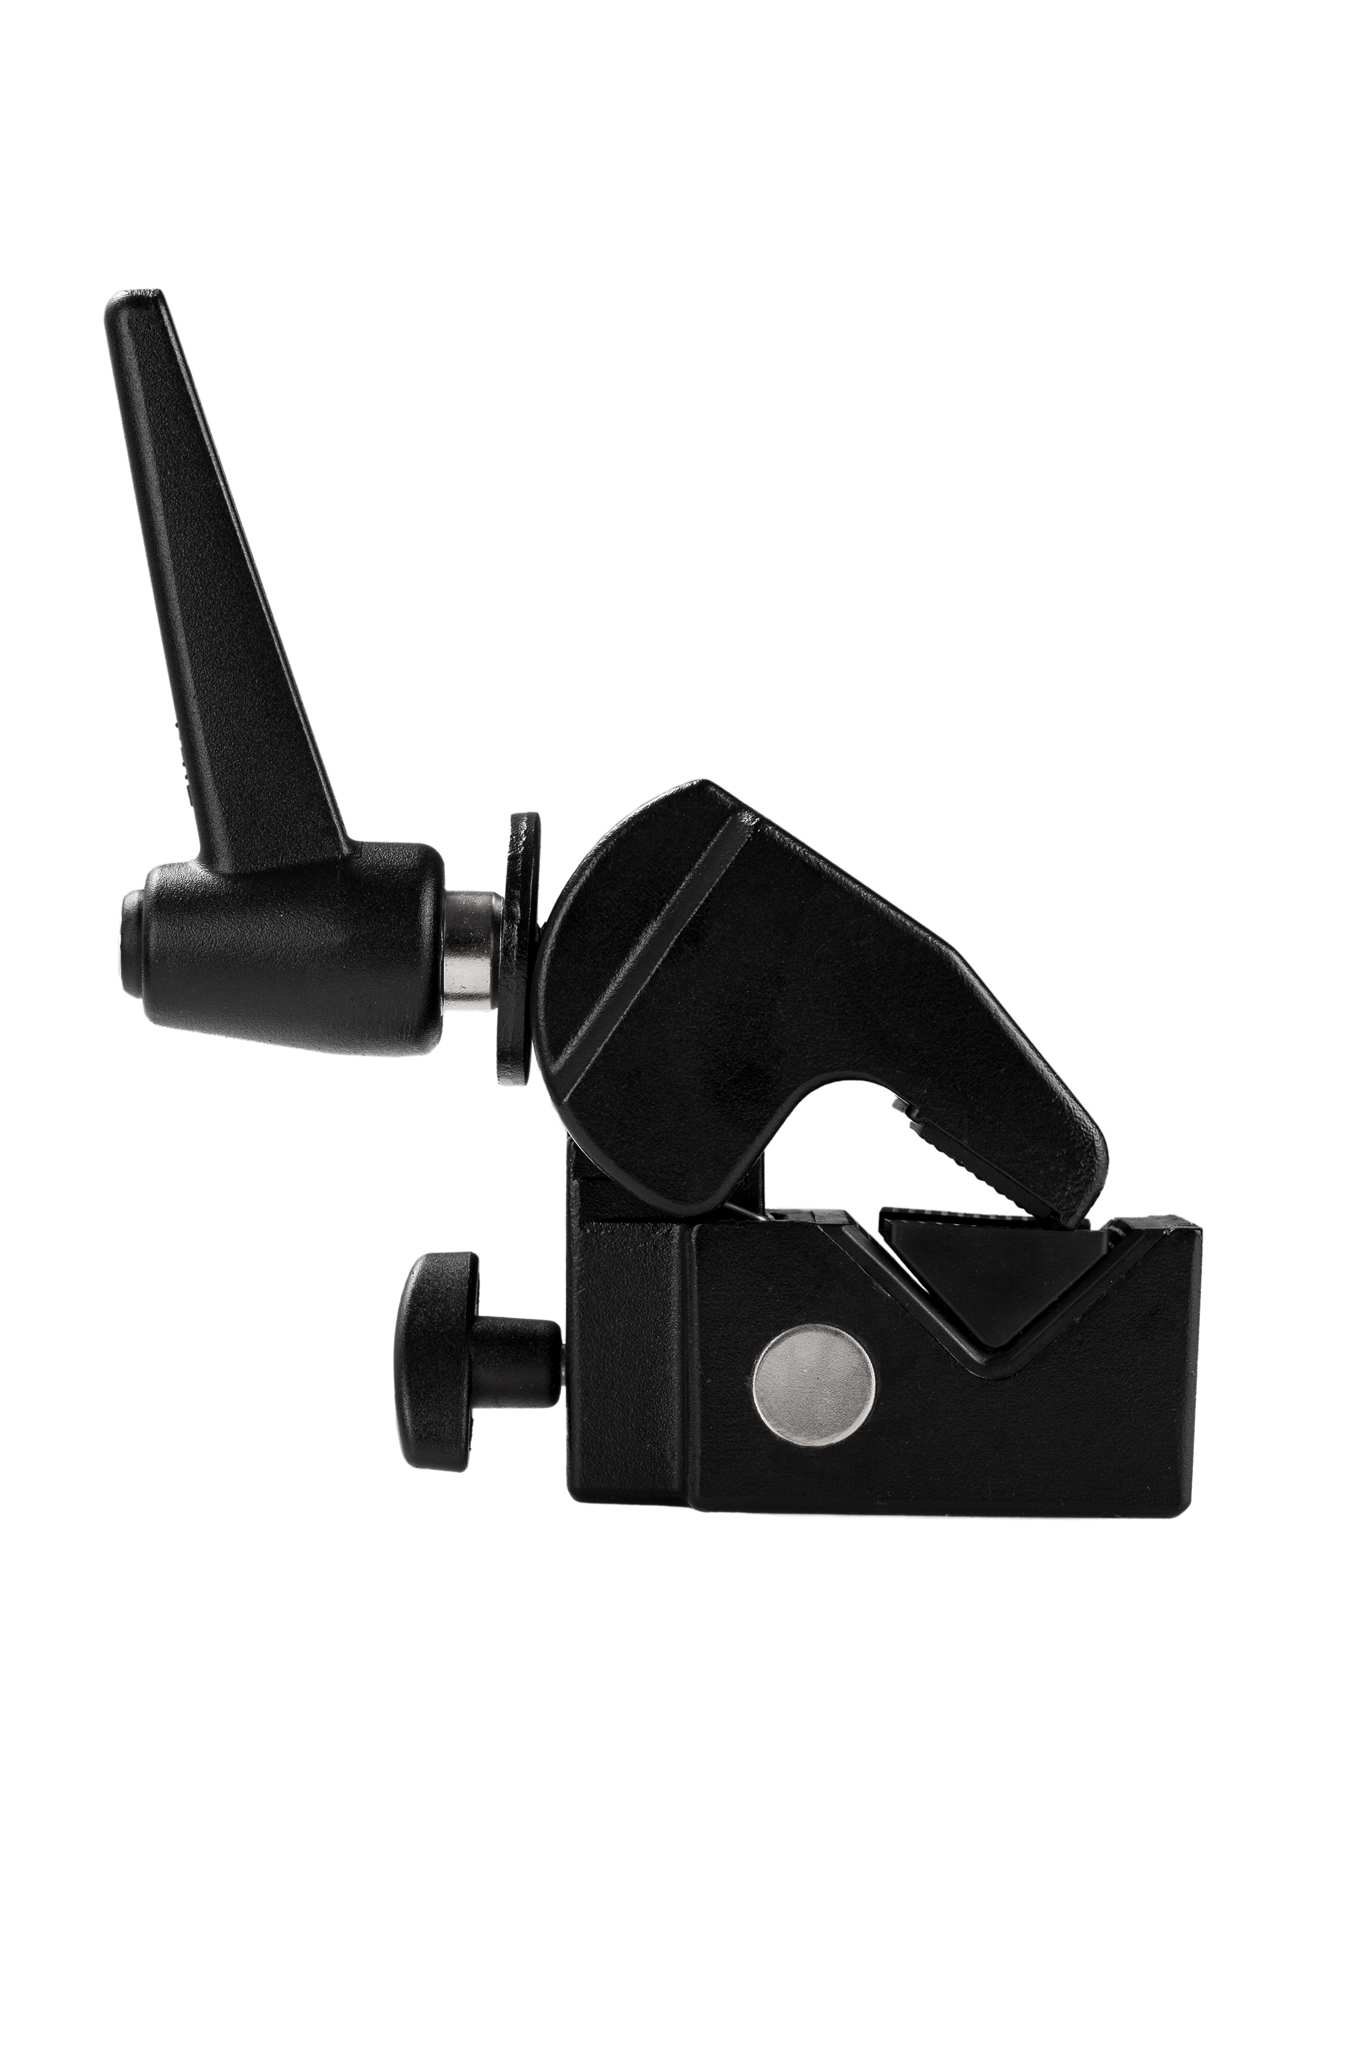 Take TK-CL3 Clamp Pinza Tipo Manfrotto 035